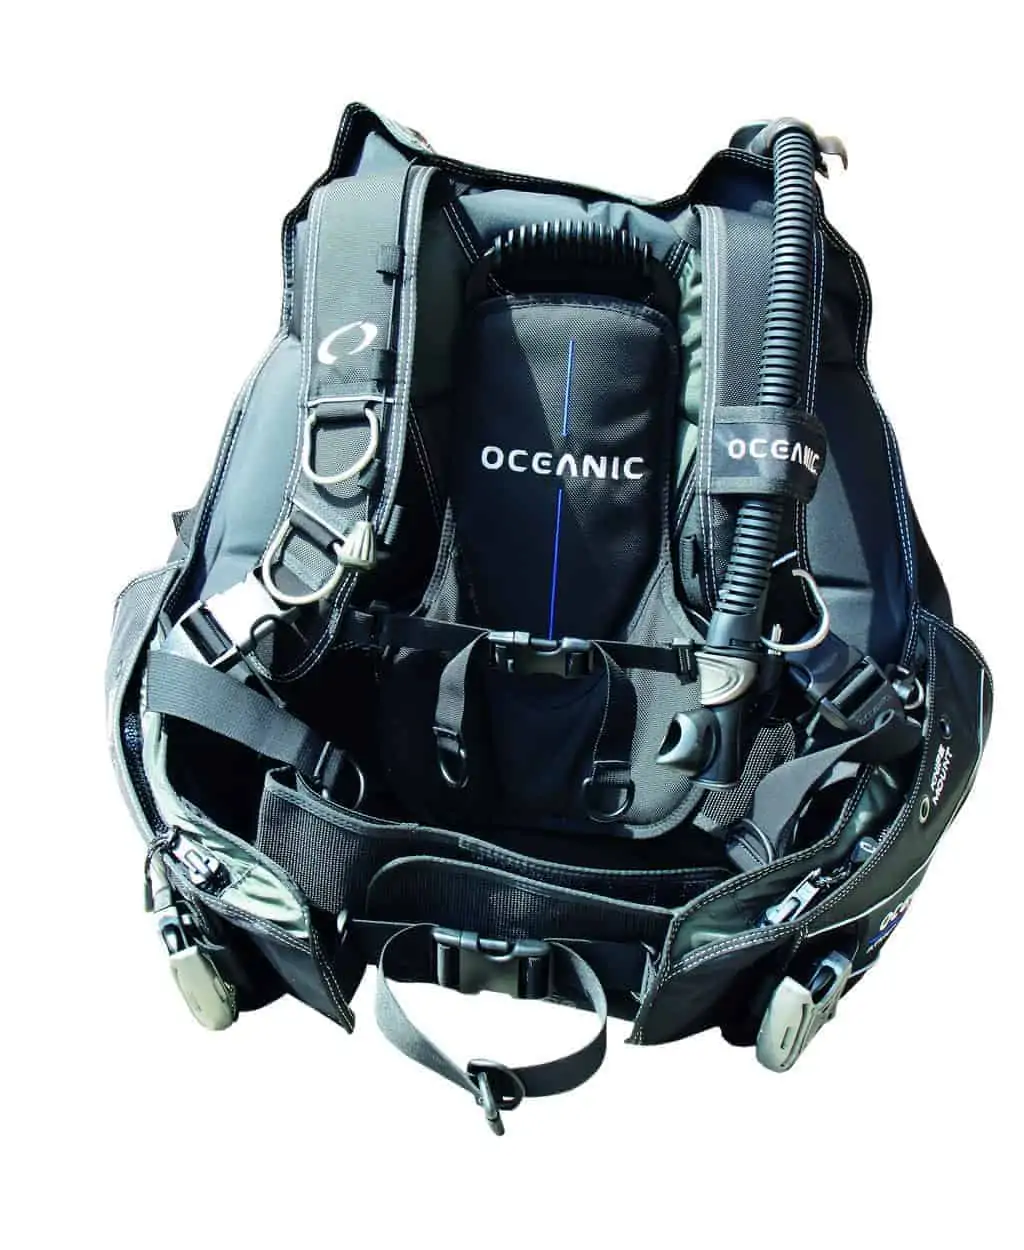 Oceanic Atmos BCD is a robustly built jacket which features an innovative hybrid aircell which provides rear-inflation for support underwater along with front inflation as per a traditional BCD for surface support.